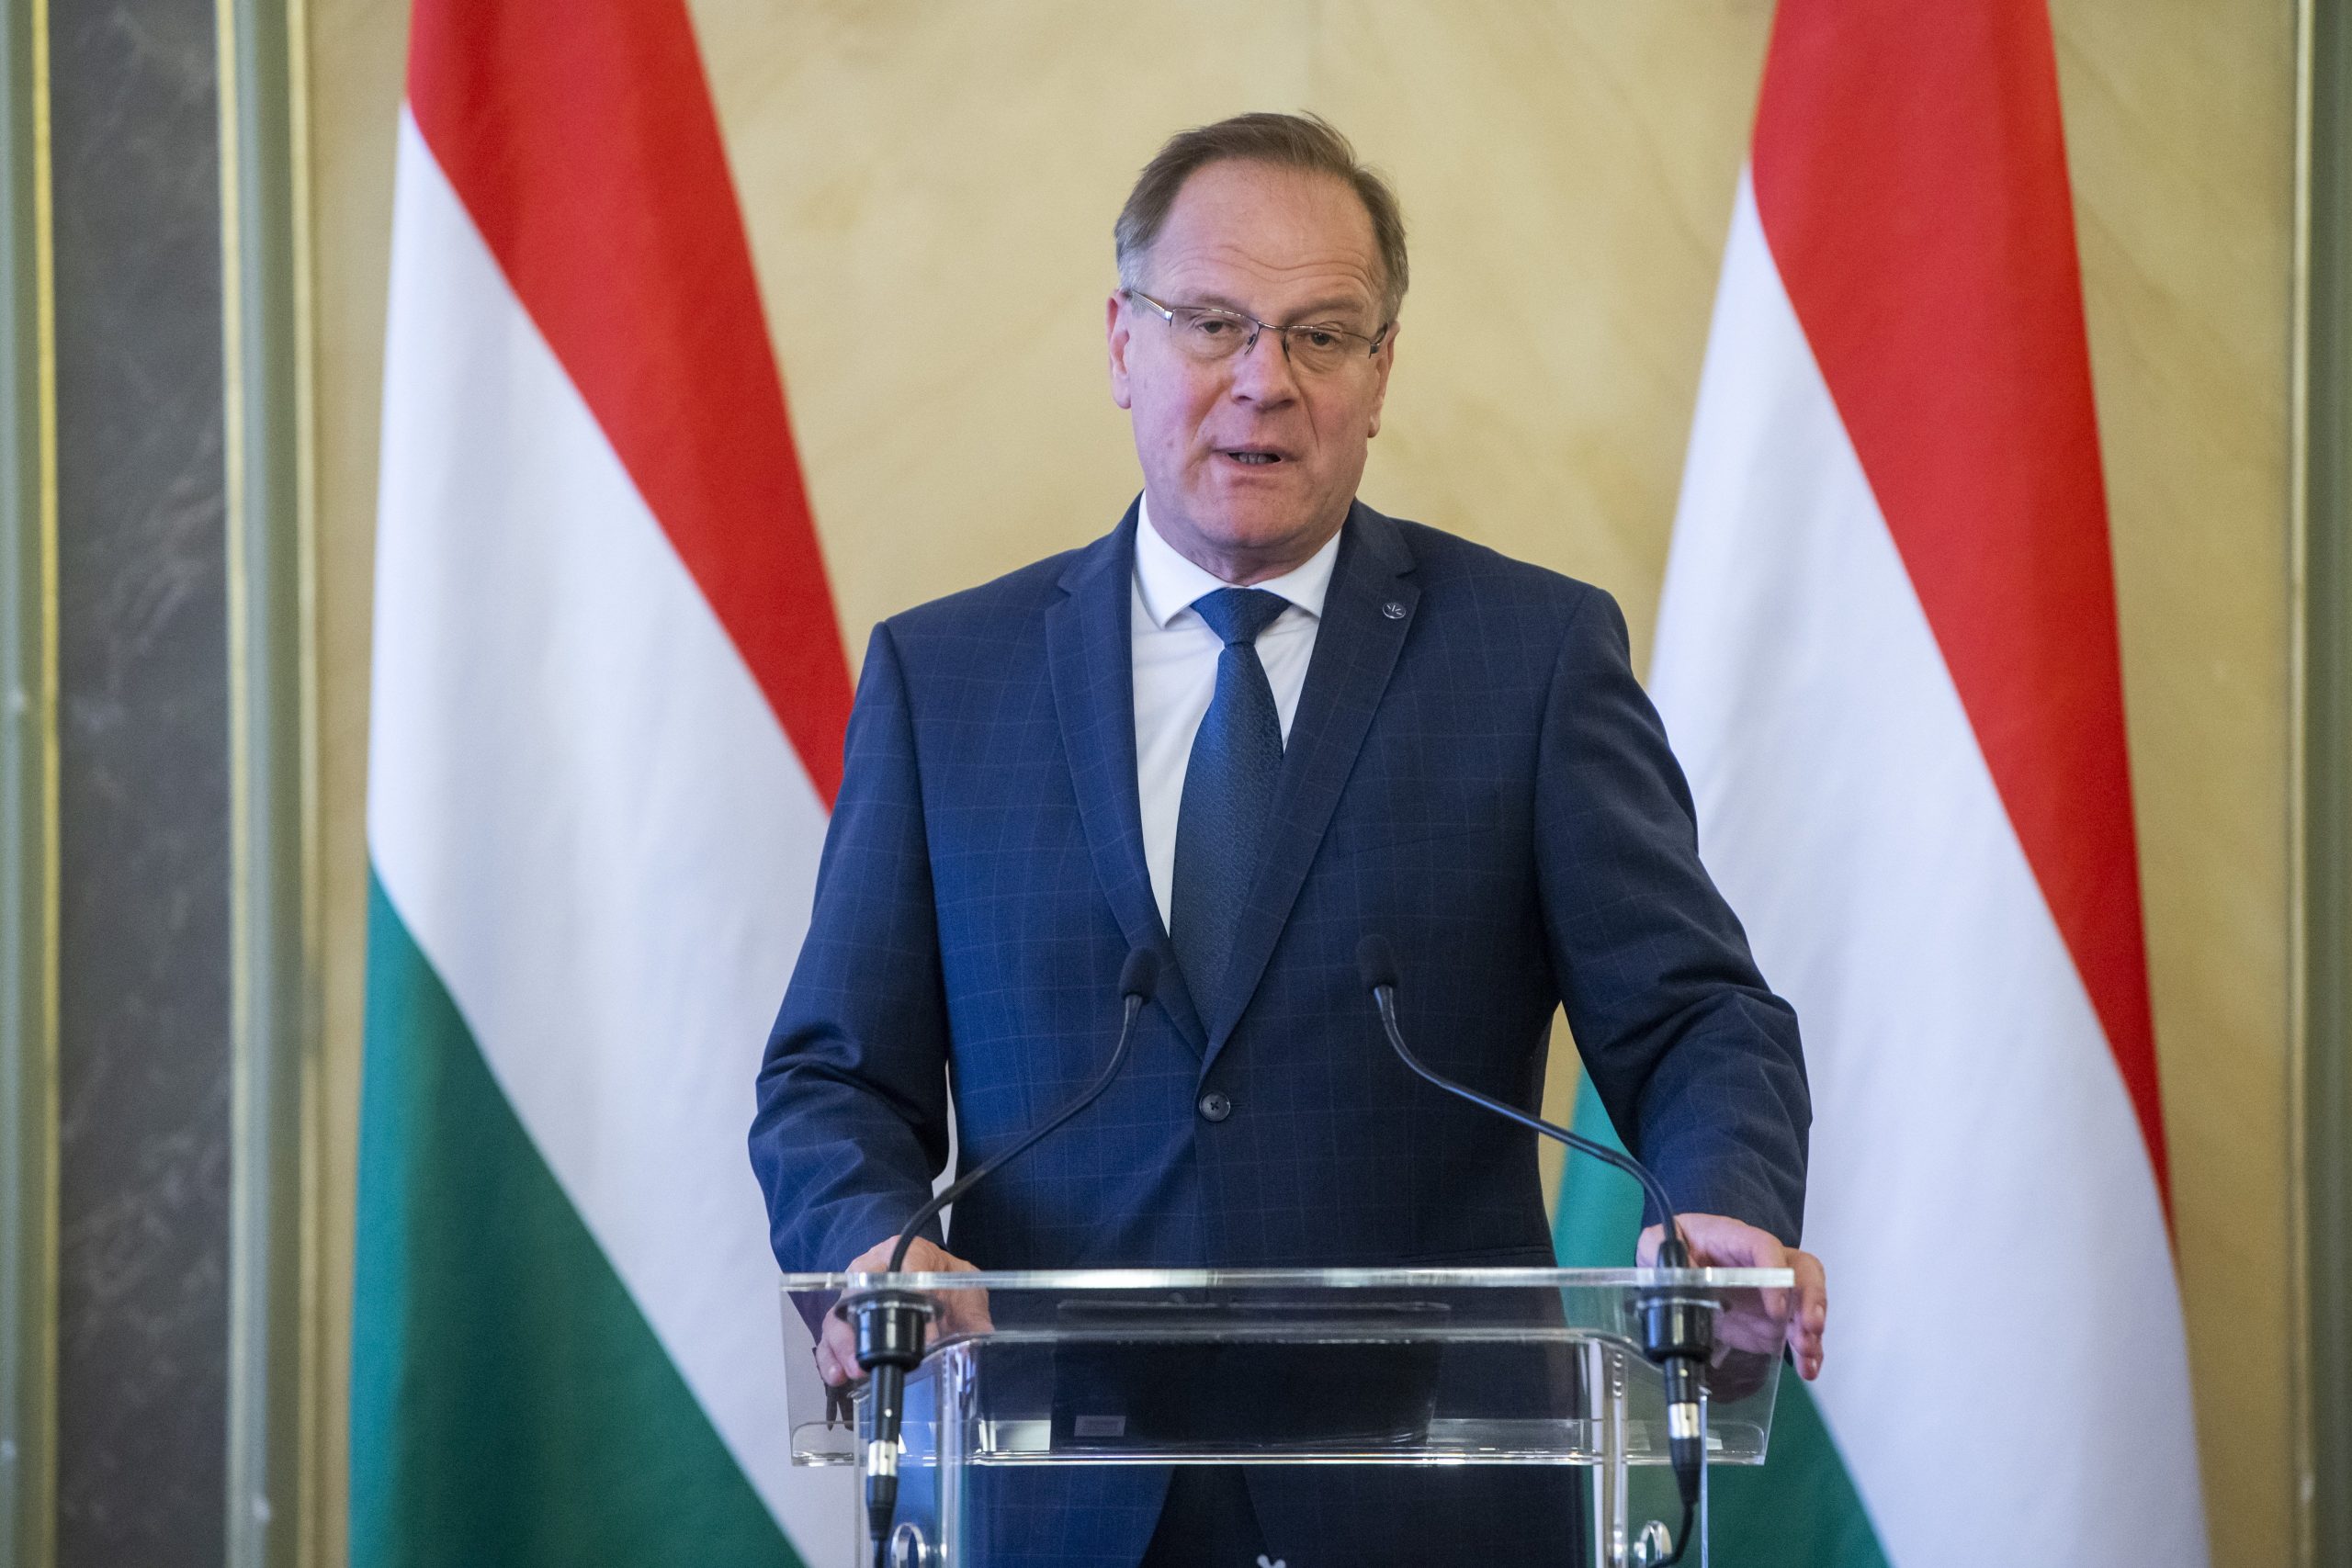 Minister Navracsics: Hungary is ready to compromise with Brussels to unblock recovery funds